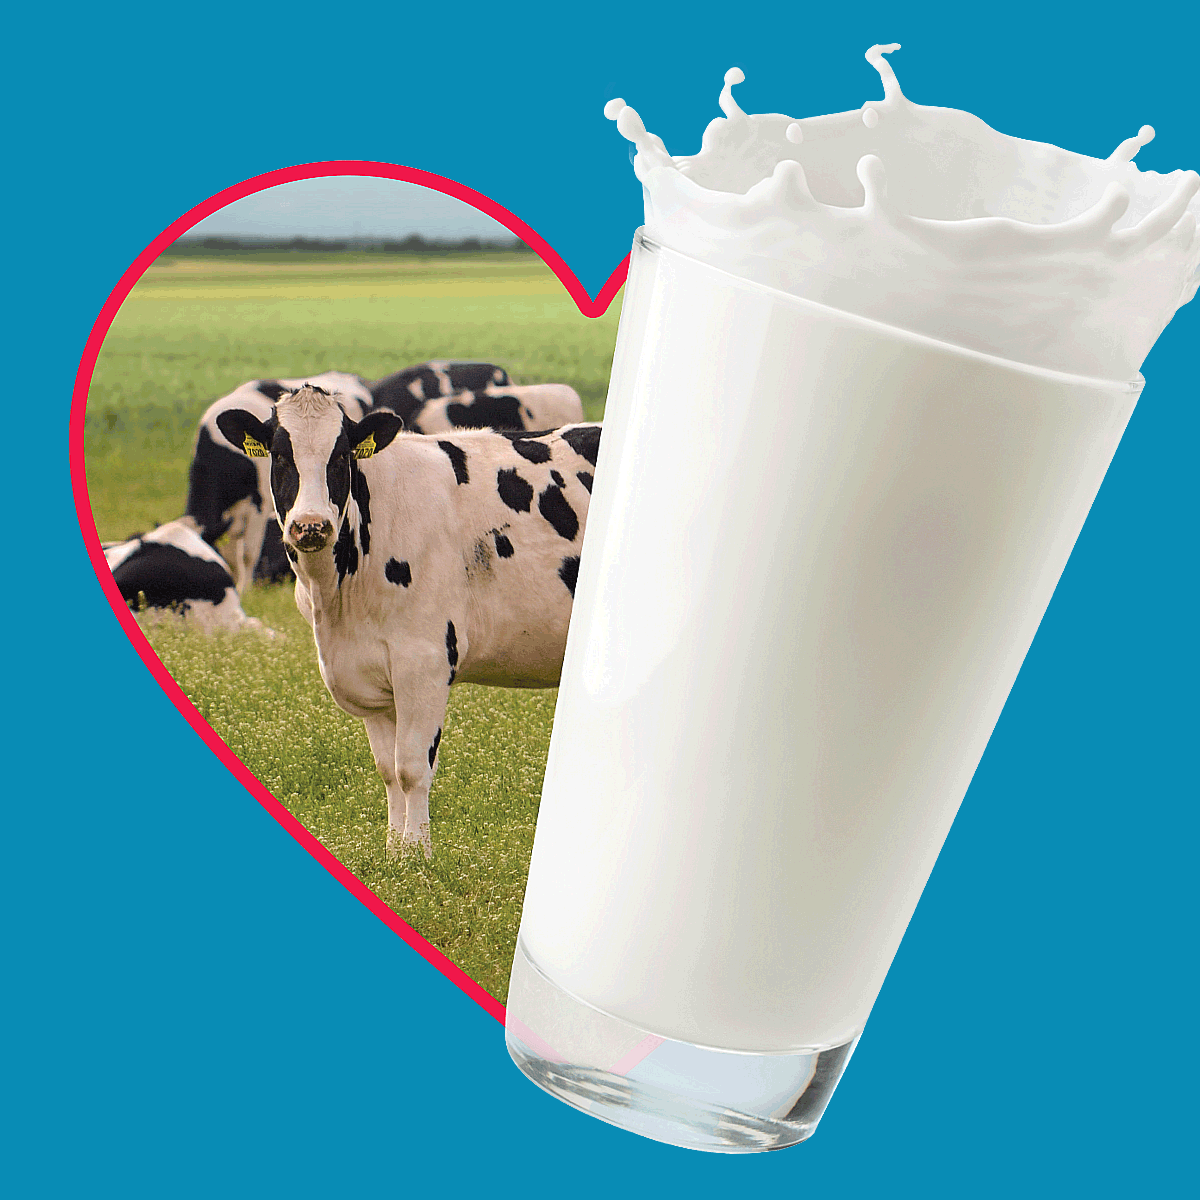 Cow and glass of milk in a heart